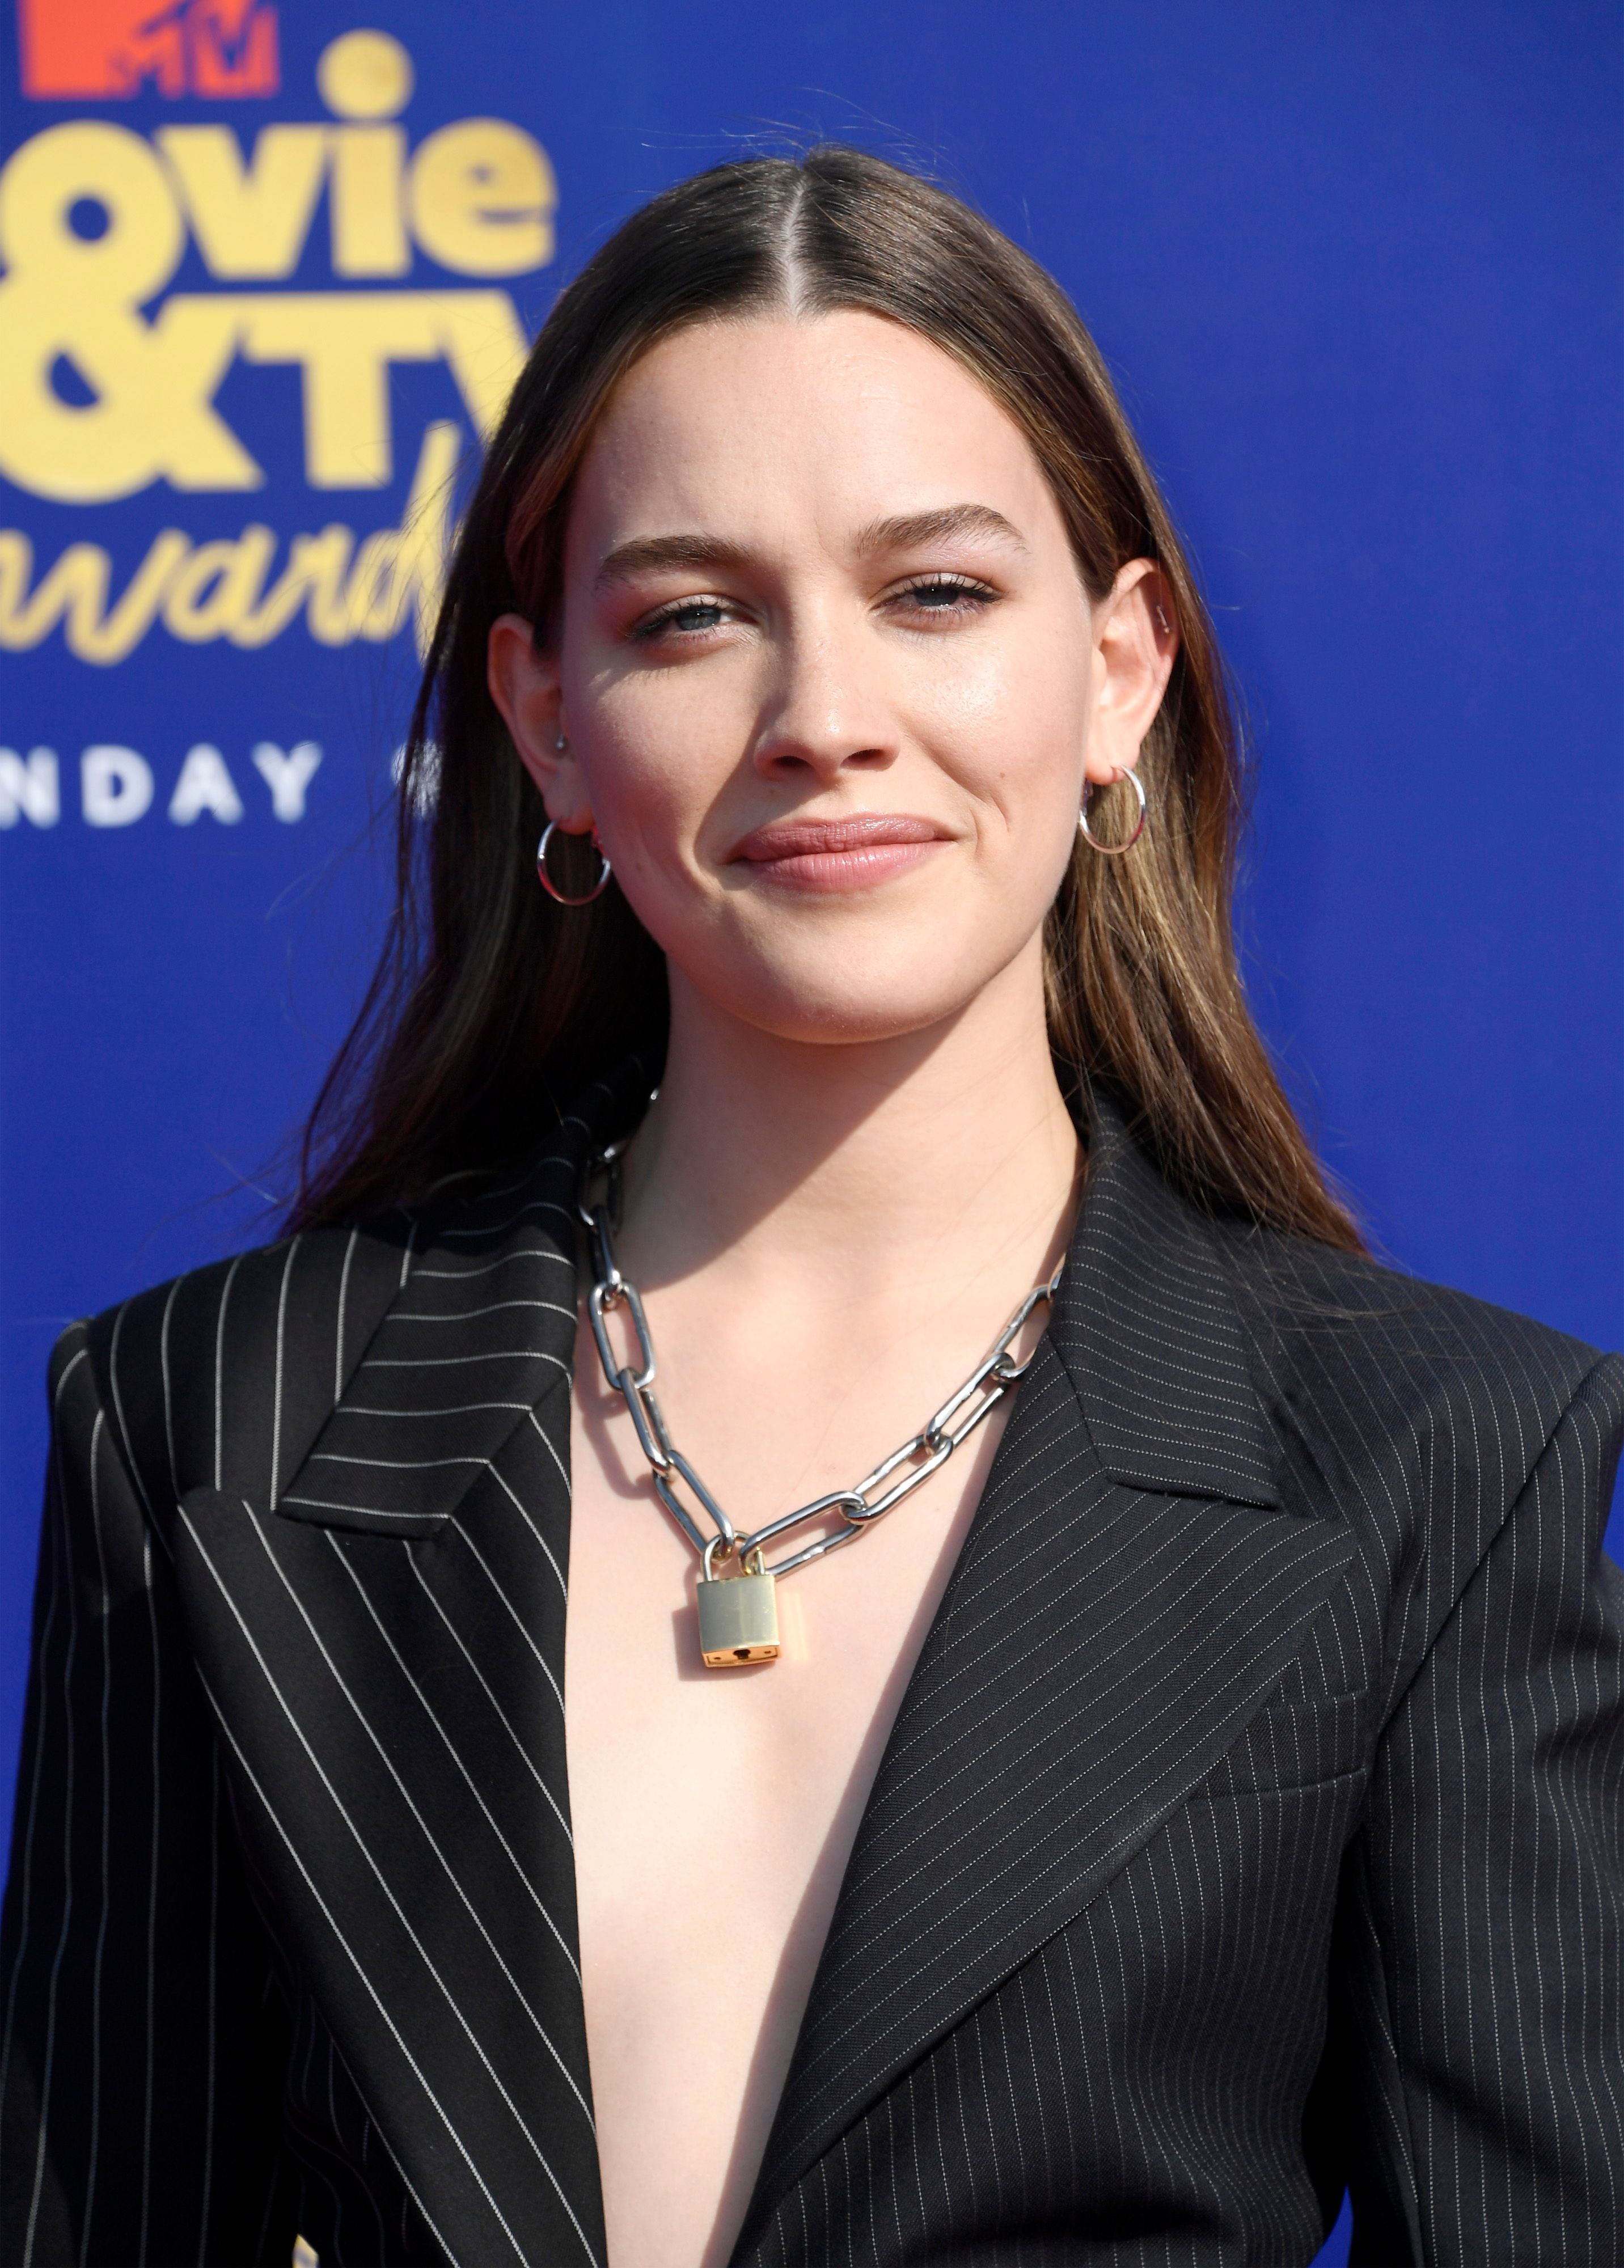 Victoria Pedretti at the 2019 MTV Movie and TV Awards on June 15, 2019, in Santa Monica, California. | Source: Getty Images